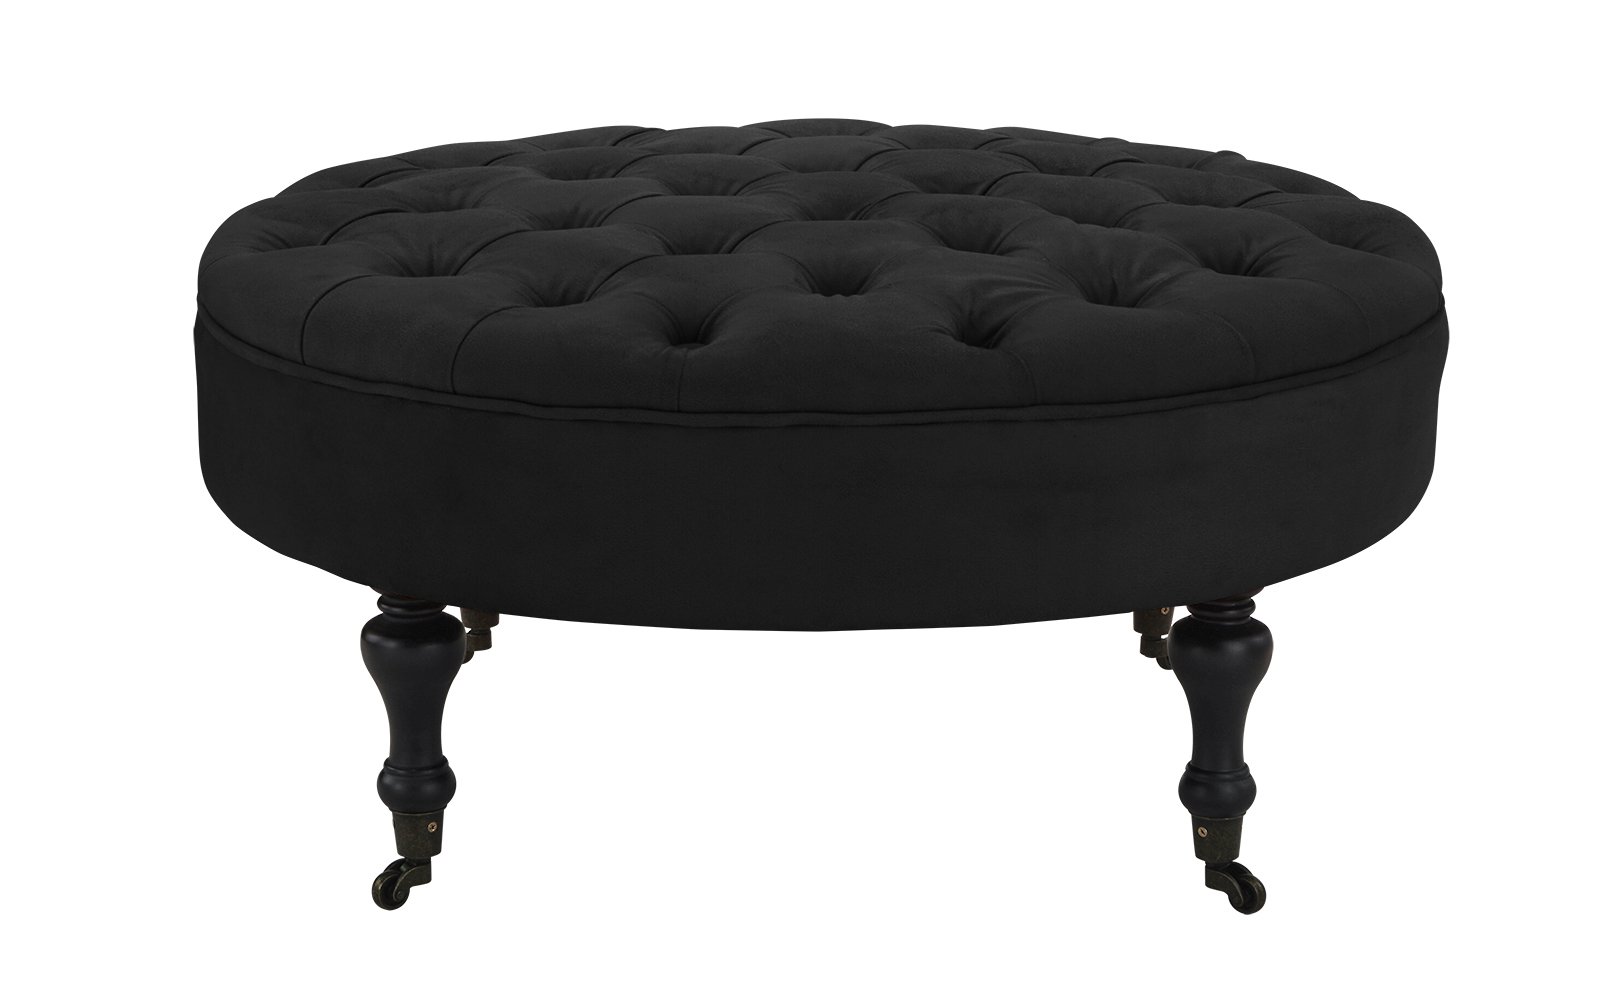 marla victorian inspired tufted brush microfiber accent table blk casters the range coffee tables small lamp side espresso sams patio furniture tall round kitchen glass and end